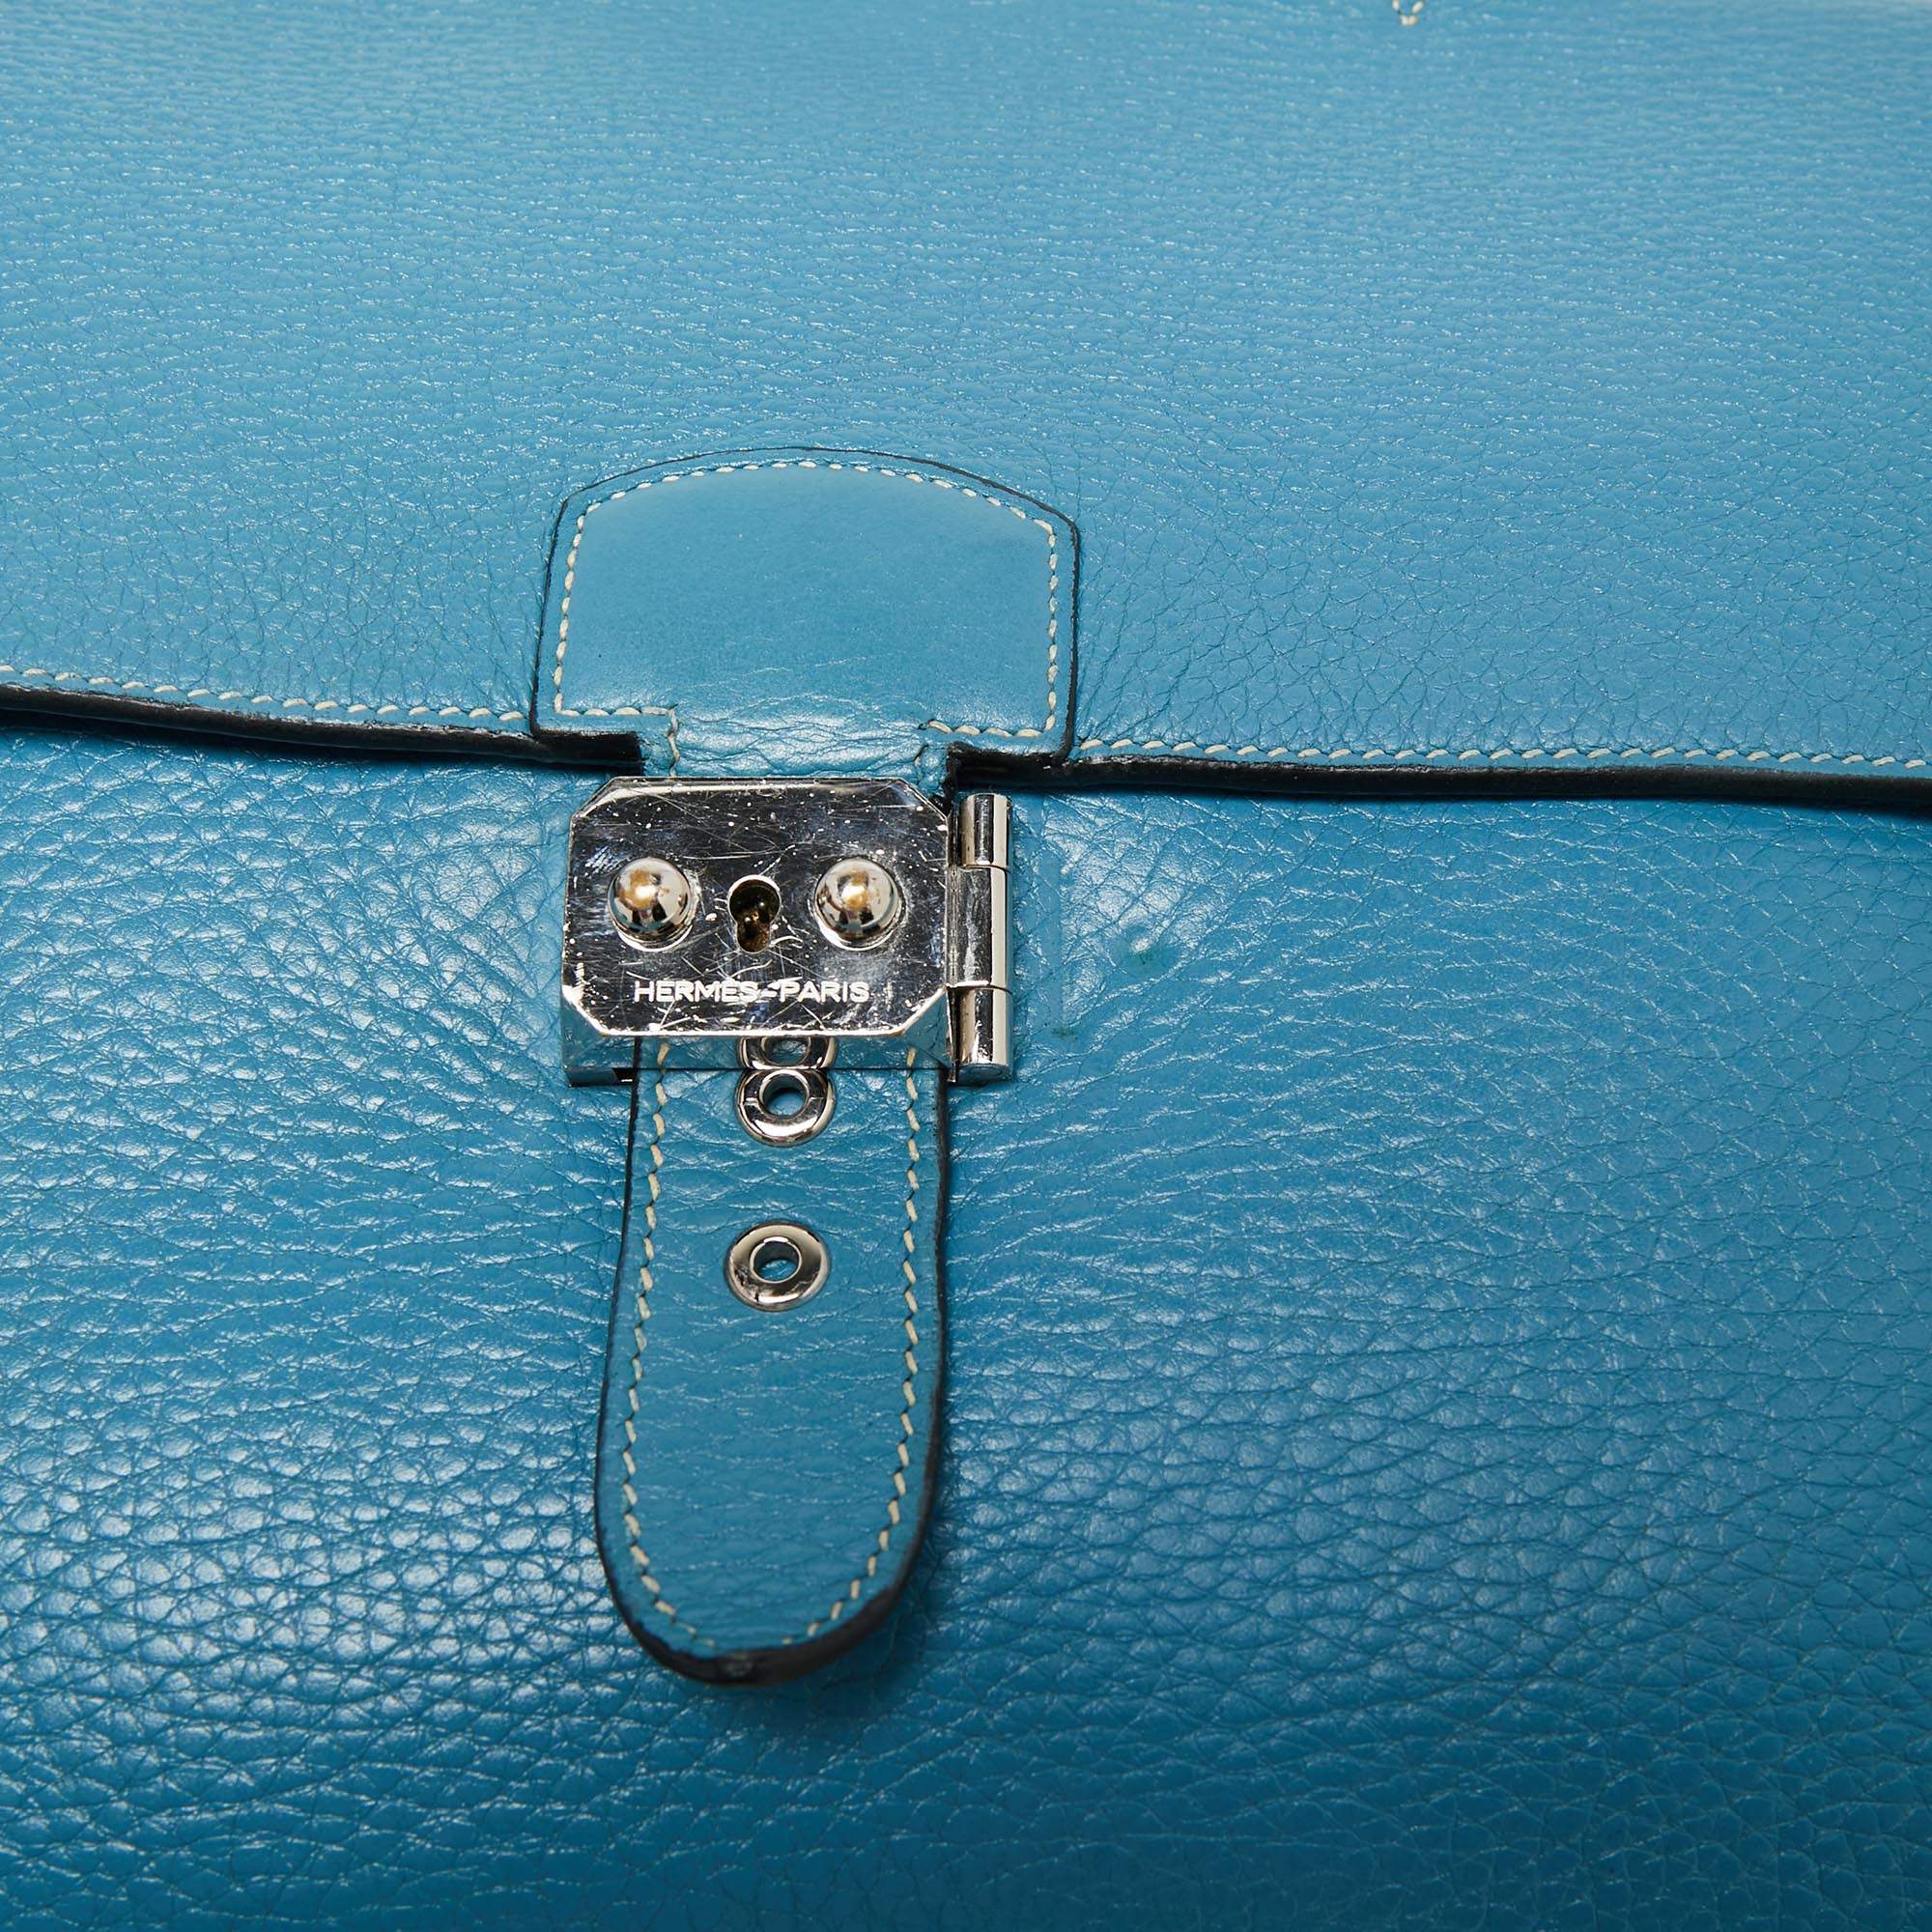 HERMES SAC A DEPECHE 38 Clemence leather Etoupe gray/Blue electric